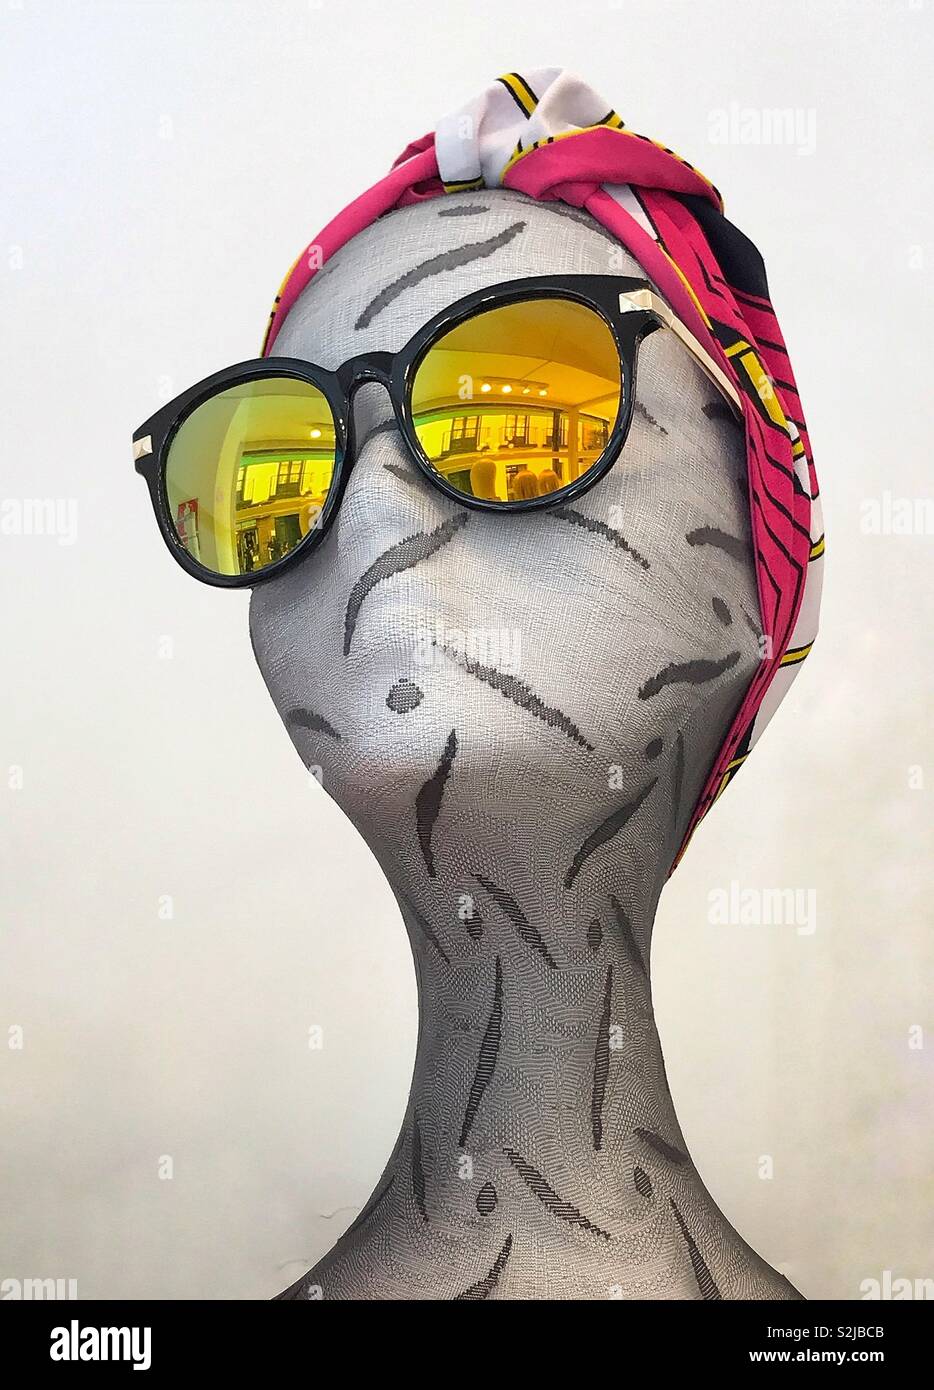 Mannequin head of female to display mirror coated sunglasses Stock Photo